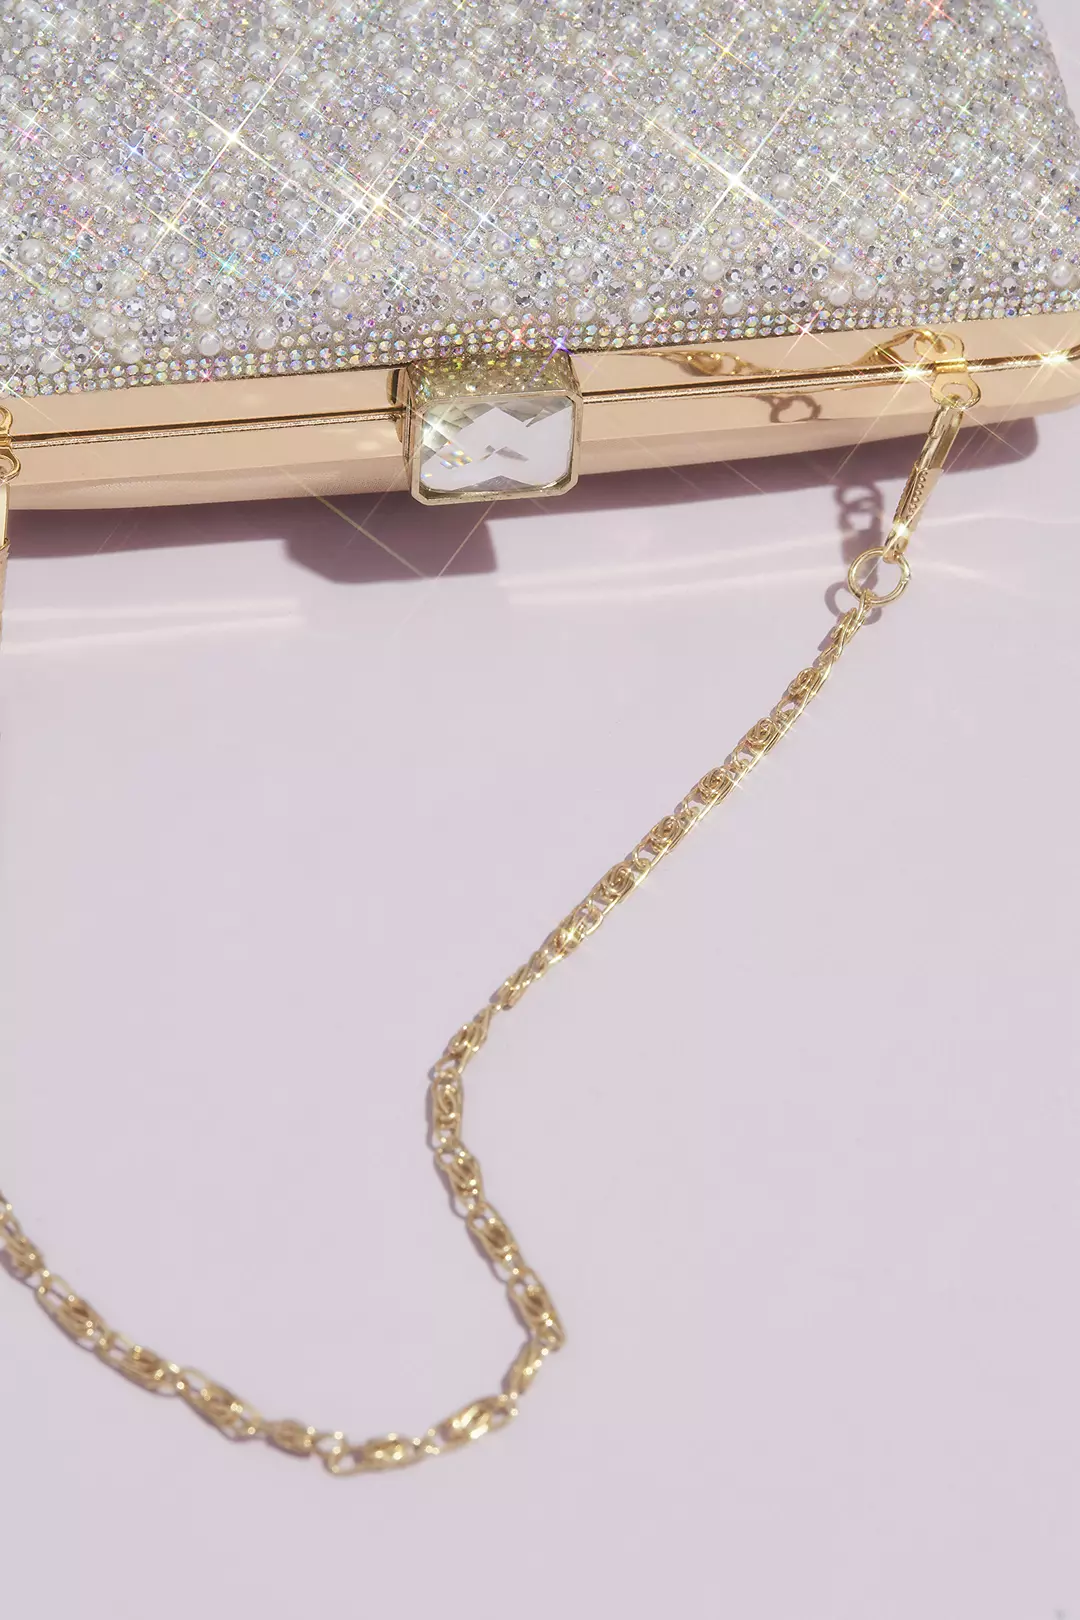 Crystal and Pearl Hinge Clutch with Gem Clasp | David's Bridal